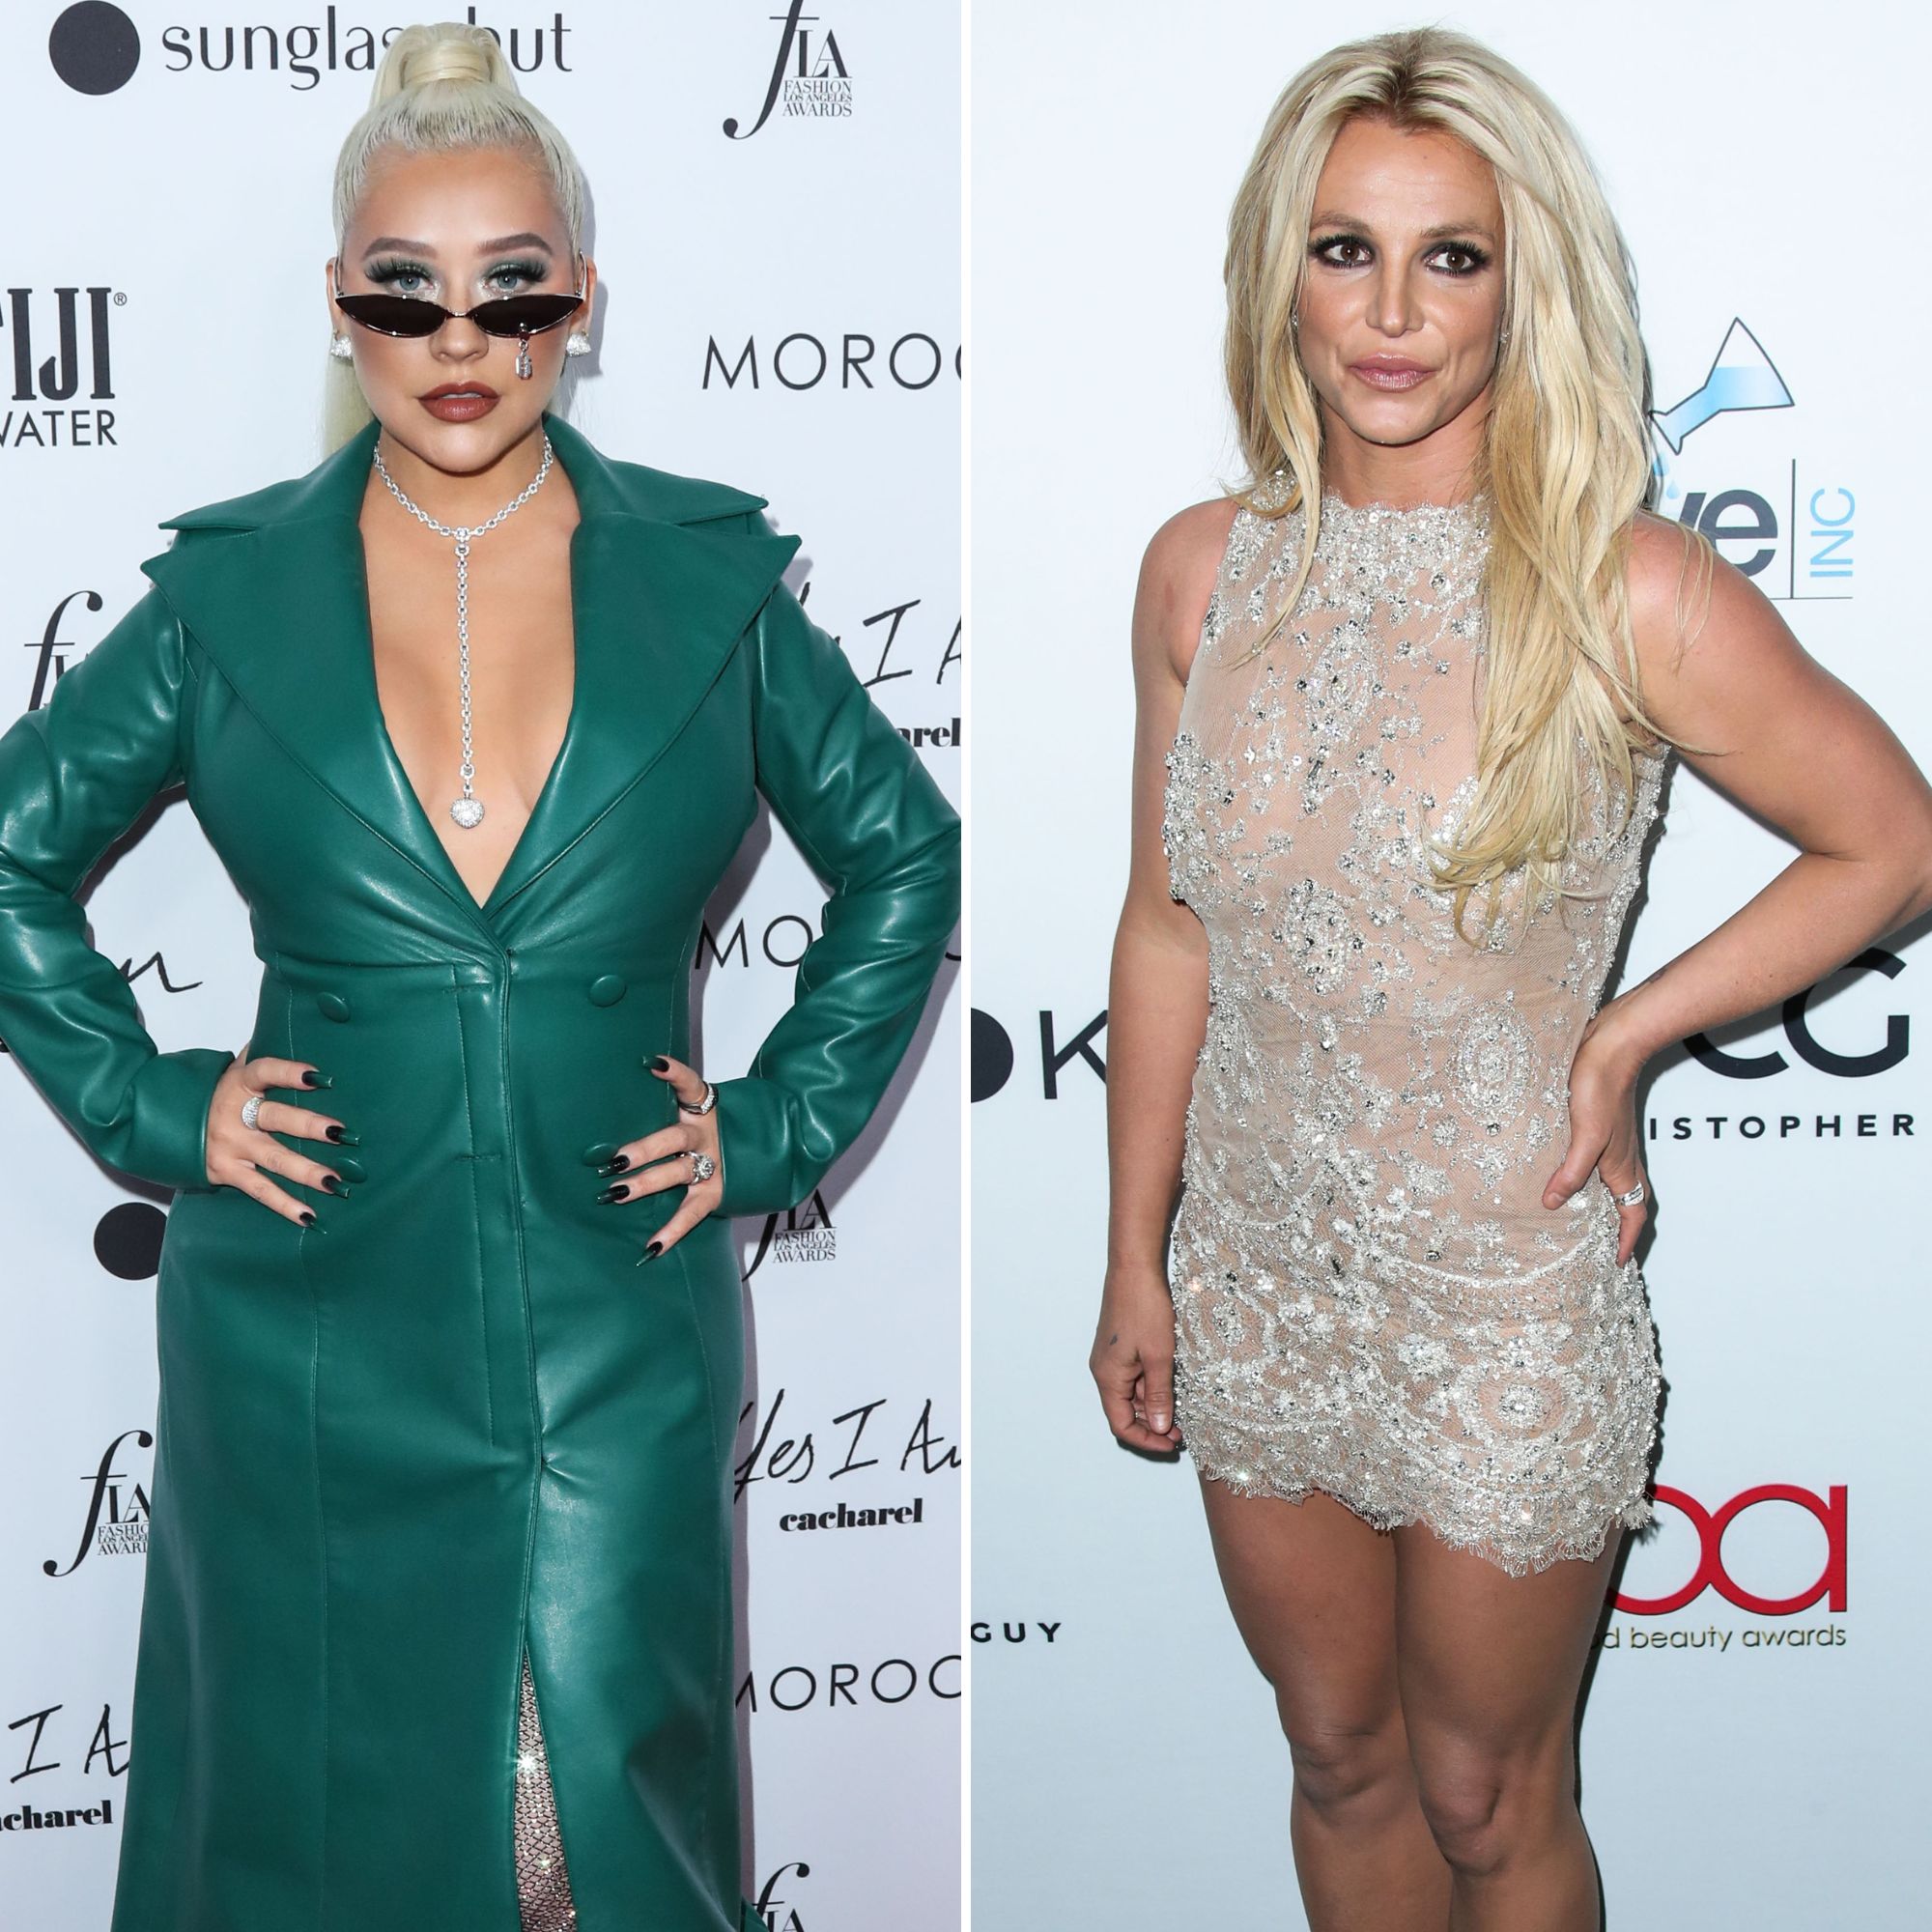 Christina Aguilera Anal - Christina Aguilera Unfollows Britney Spears After Body-Shaming